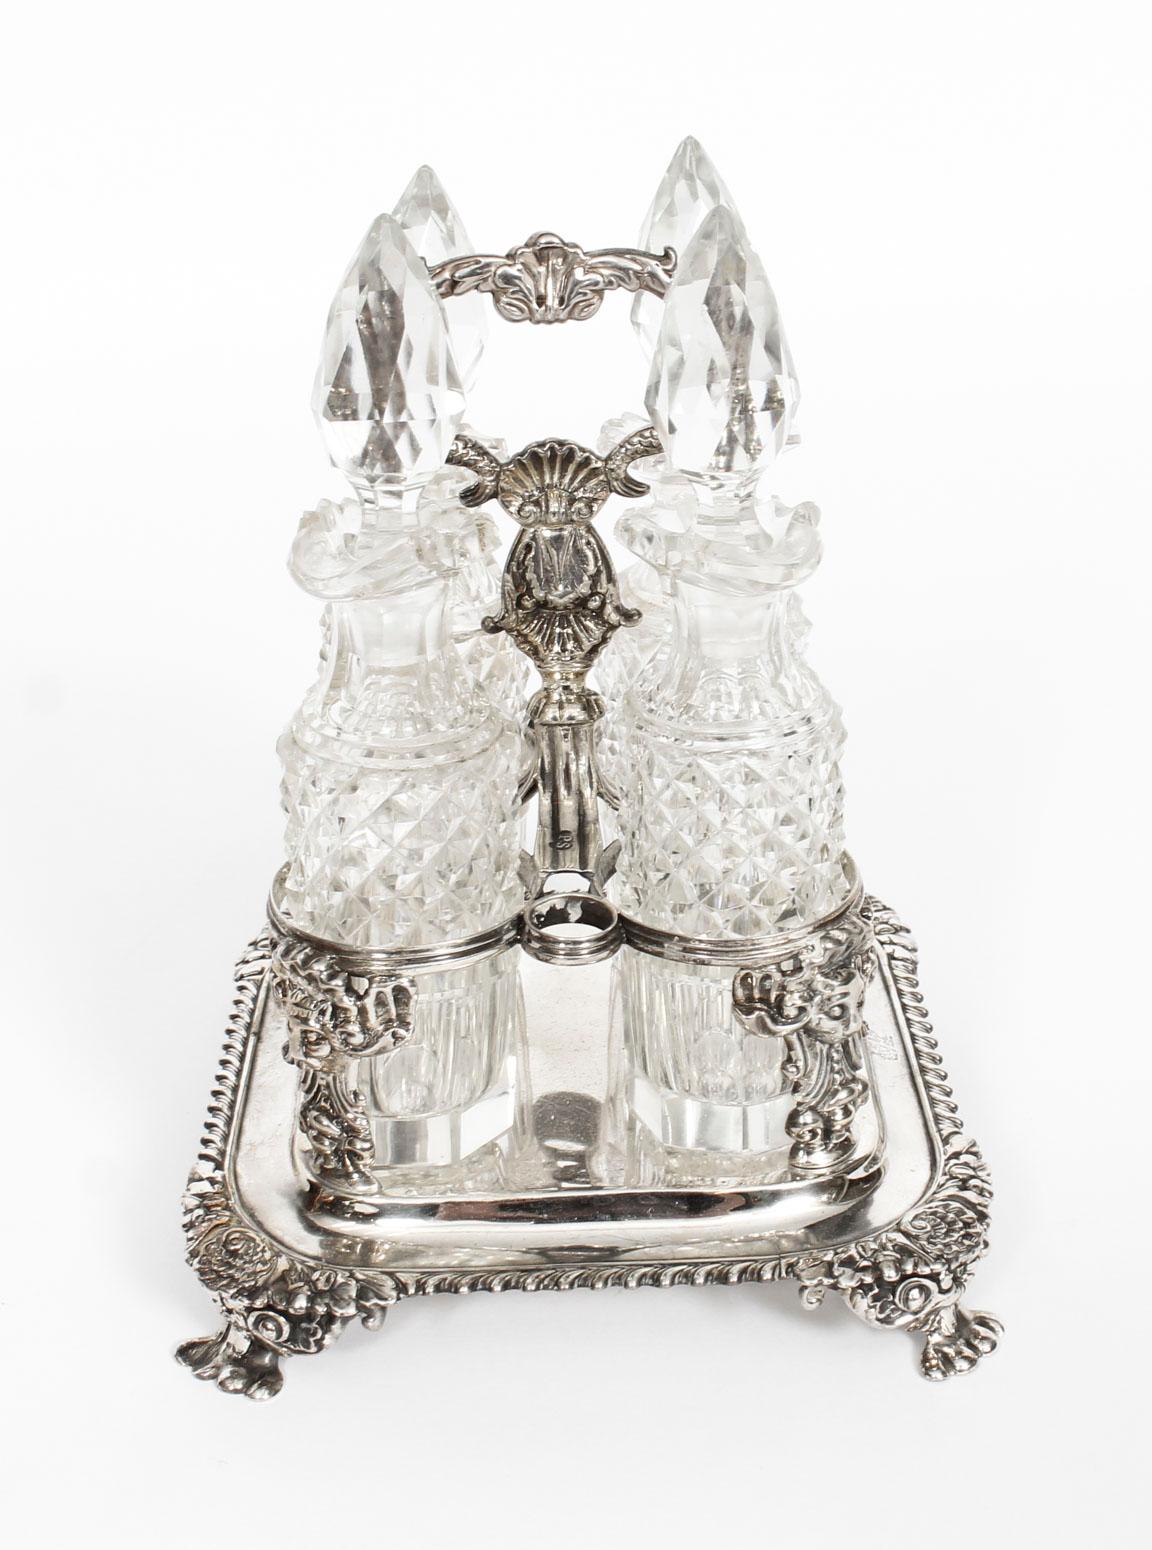 This is a fantastic antique English George III sterling silver four bottle condiment cruet with hallmarks for London 1820 and the makers mark of the renowned silversmith Paul Storr.

This rare complete set is in superb condition and features four